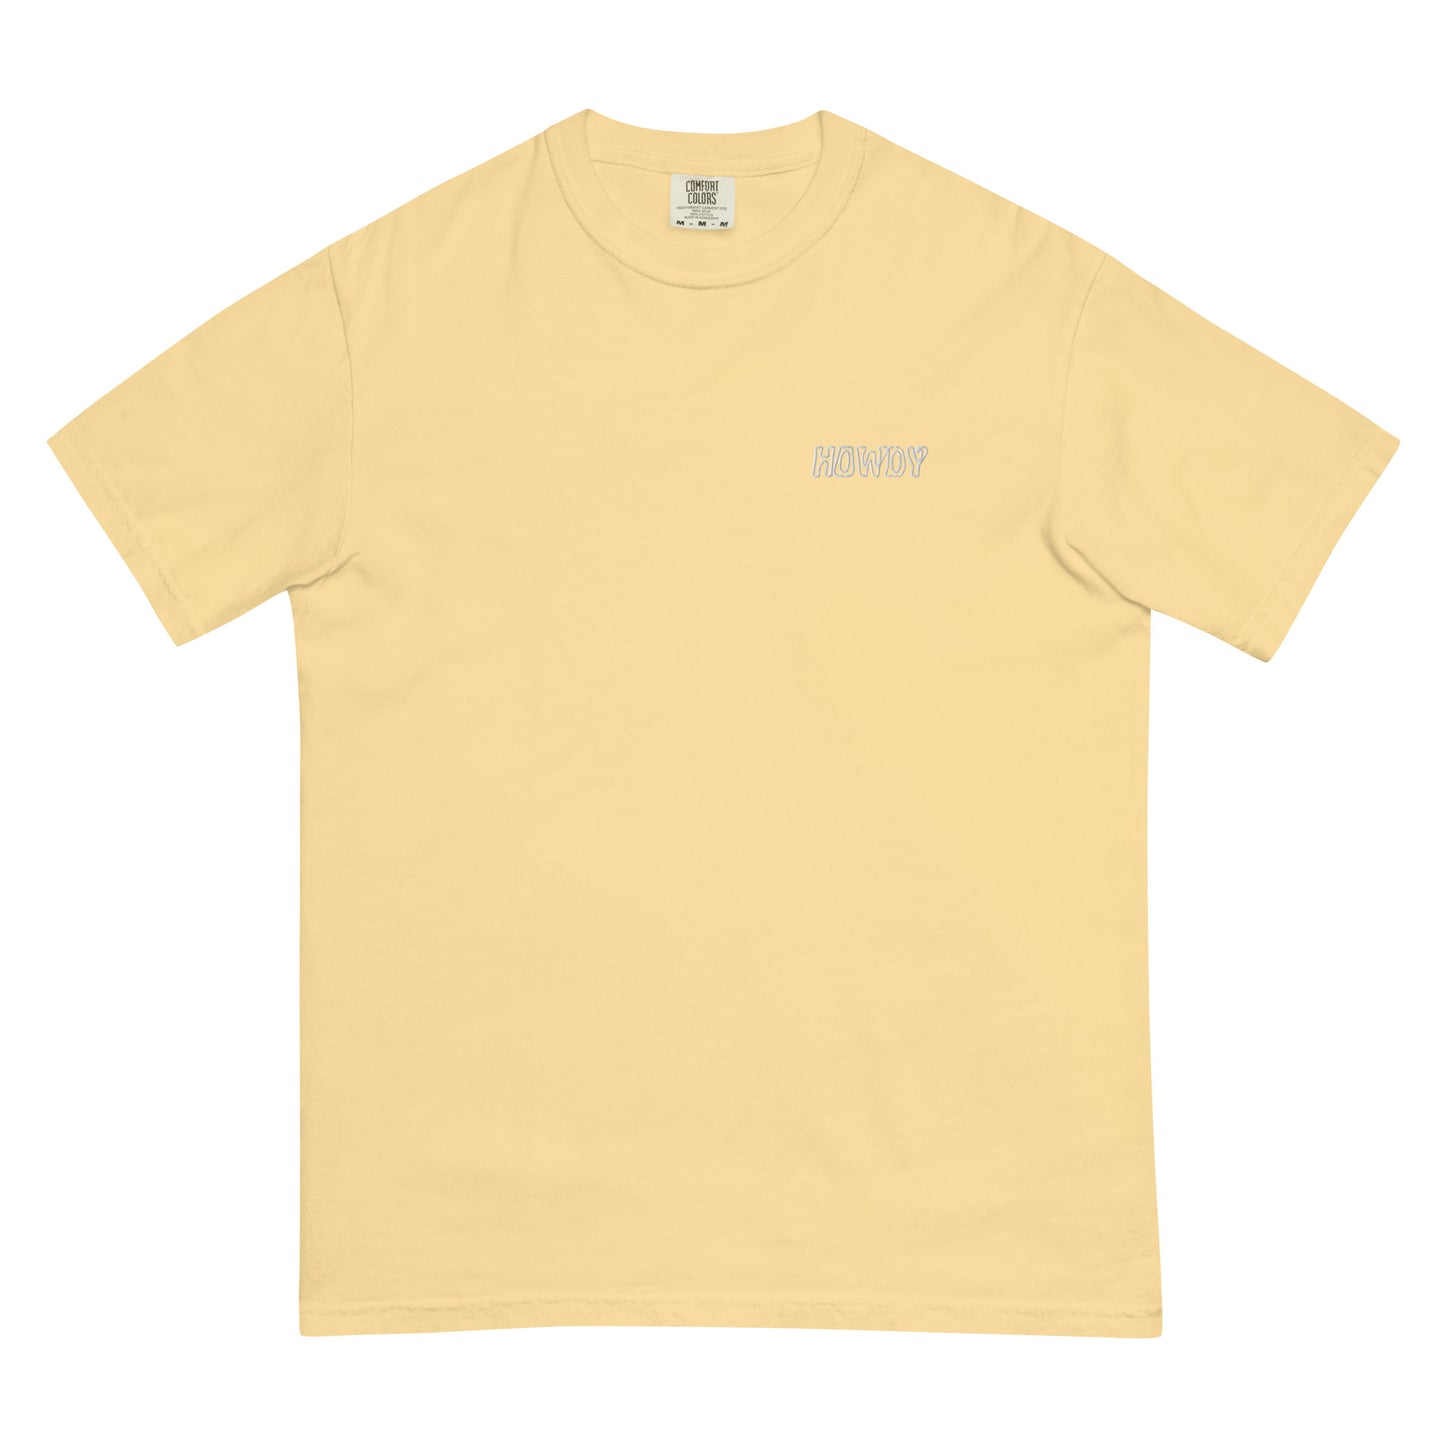 *you're doing great* - comfort colors garment-dyed heavyweight t-shirt